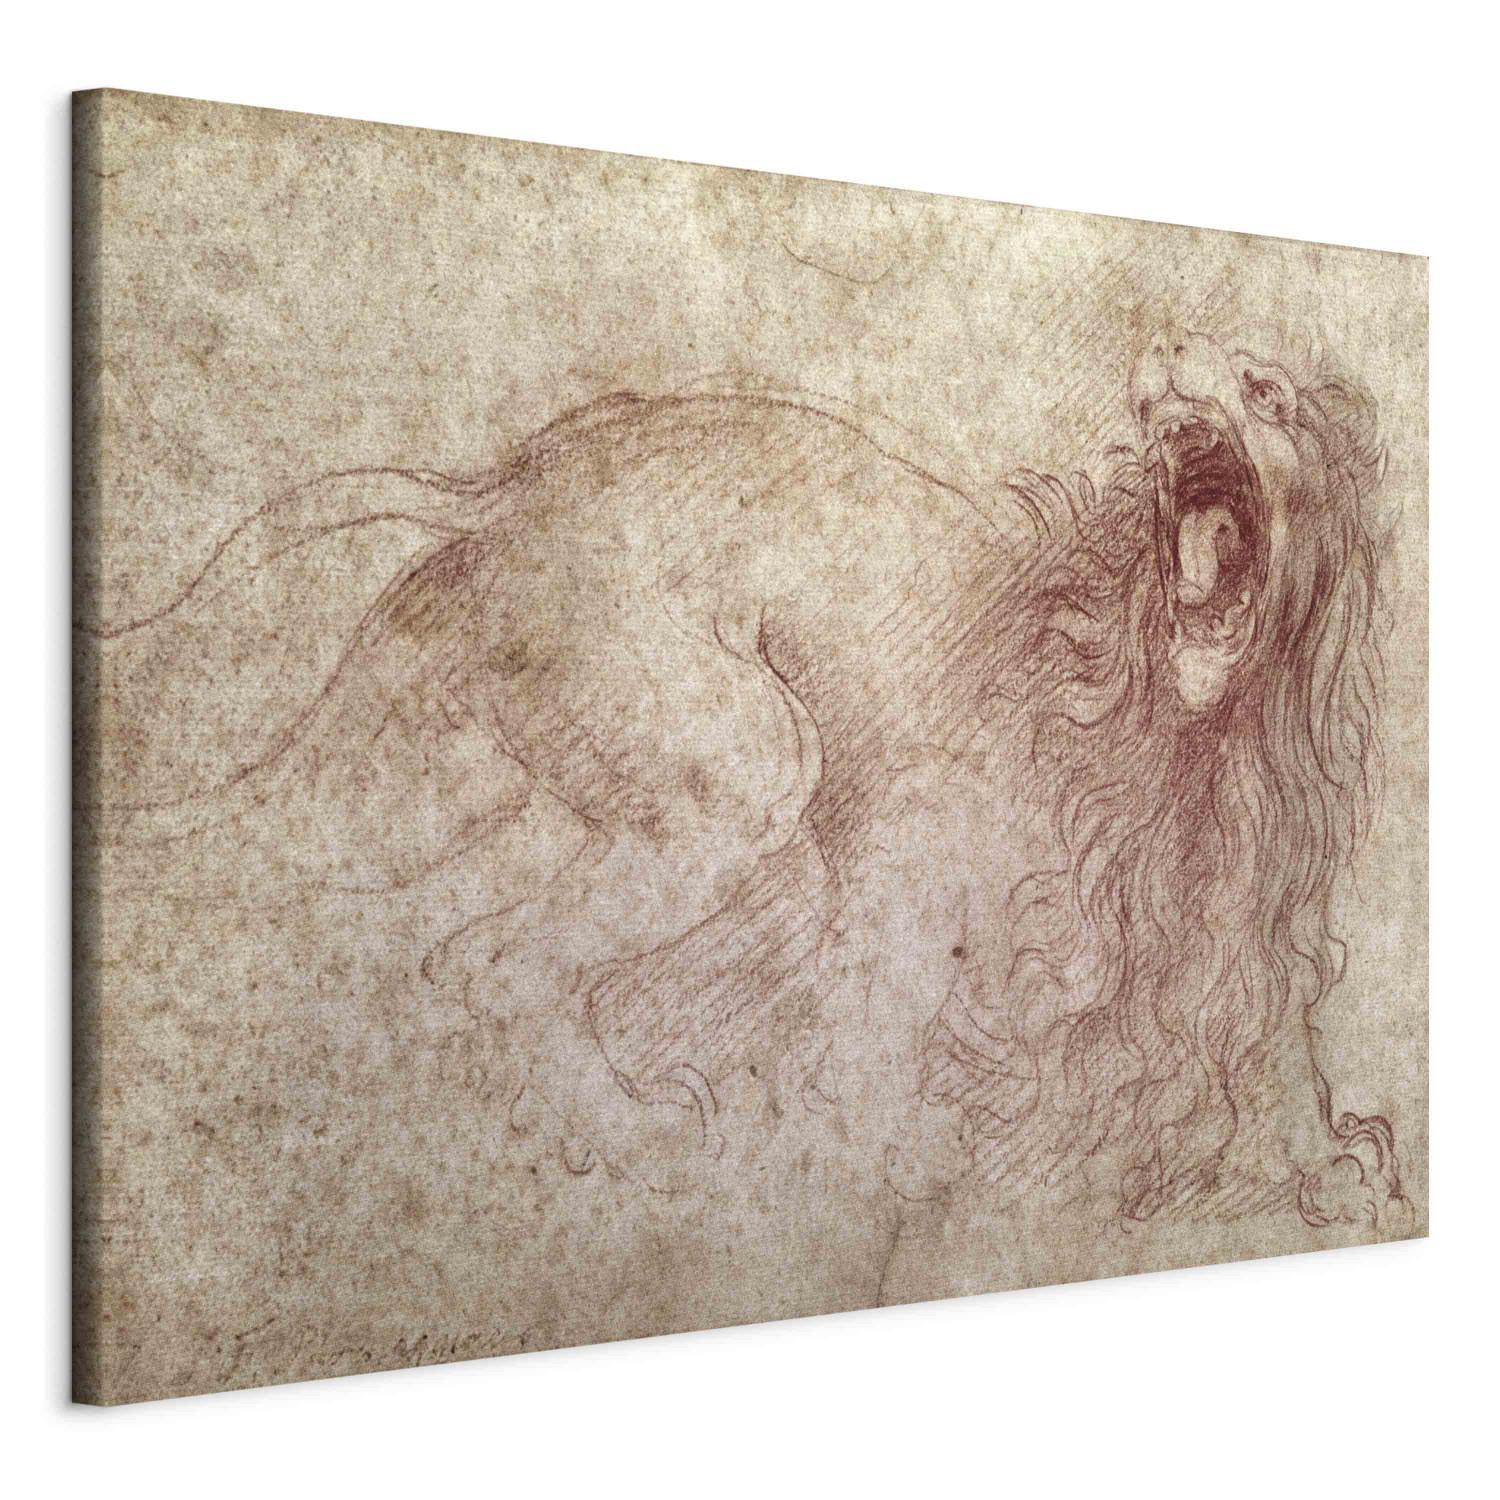 Canvas Sketch of a roaring lion